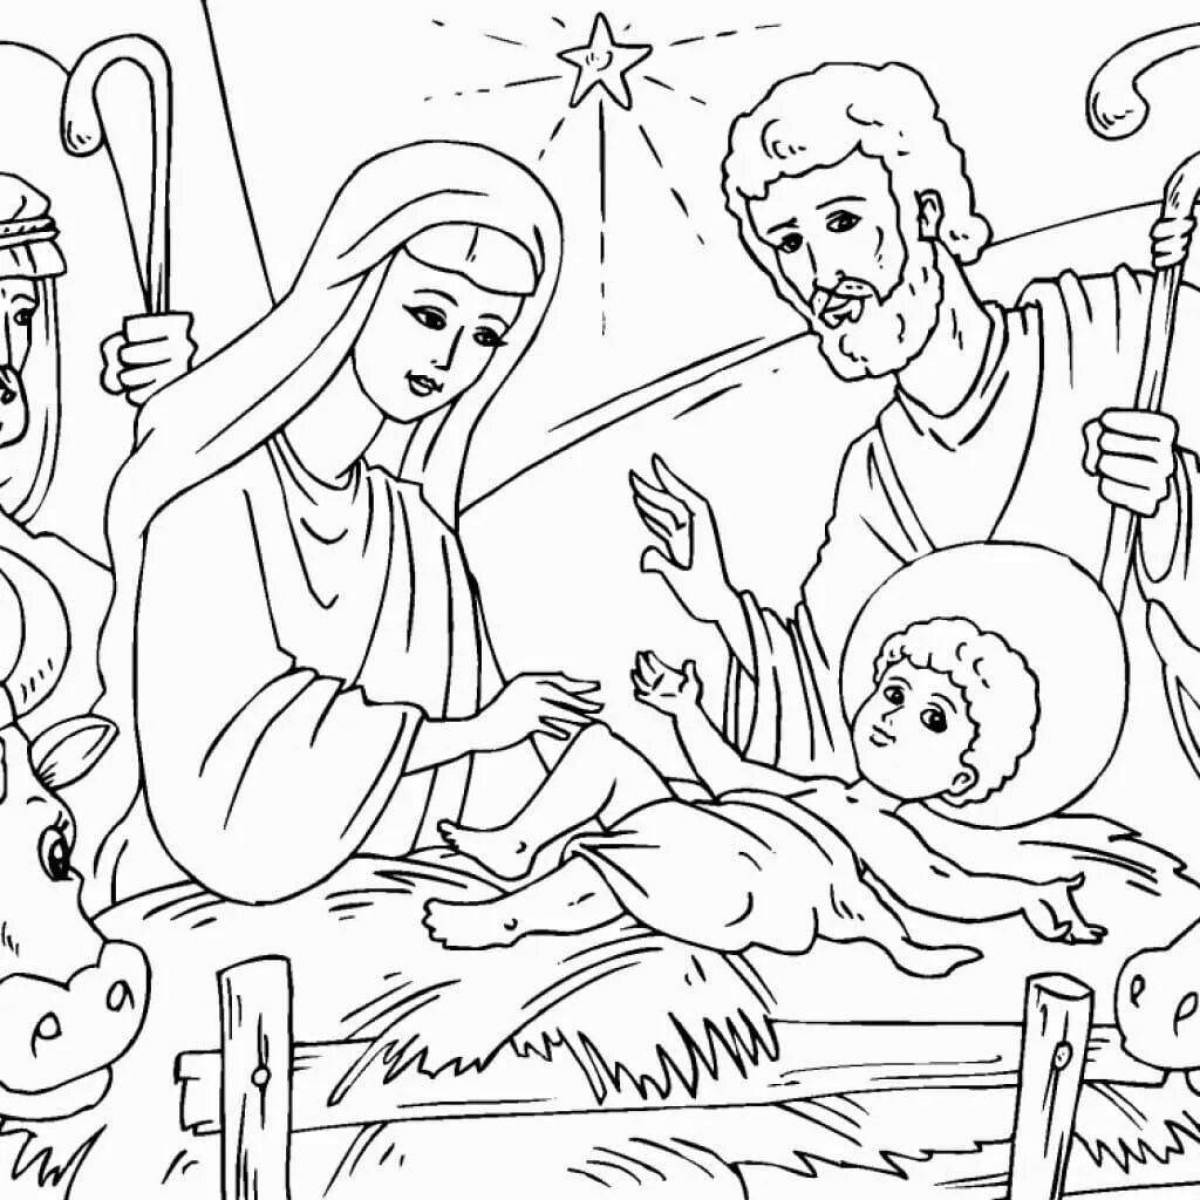 Coloring page glowing jesus in the manger